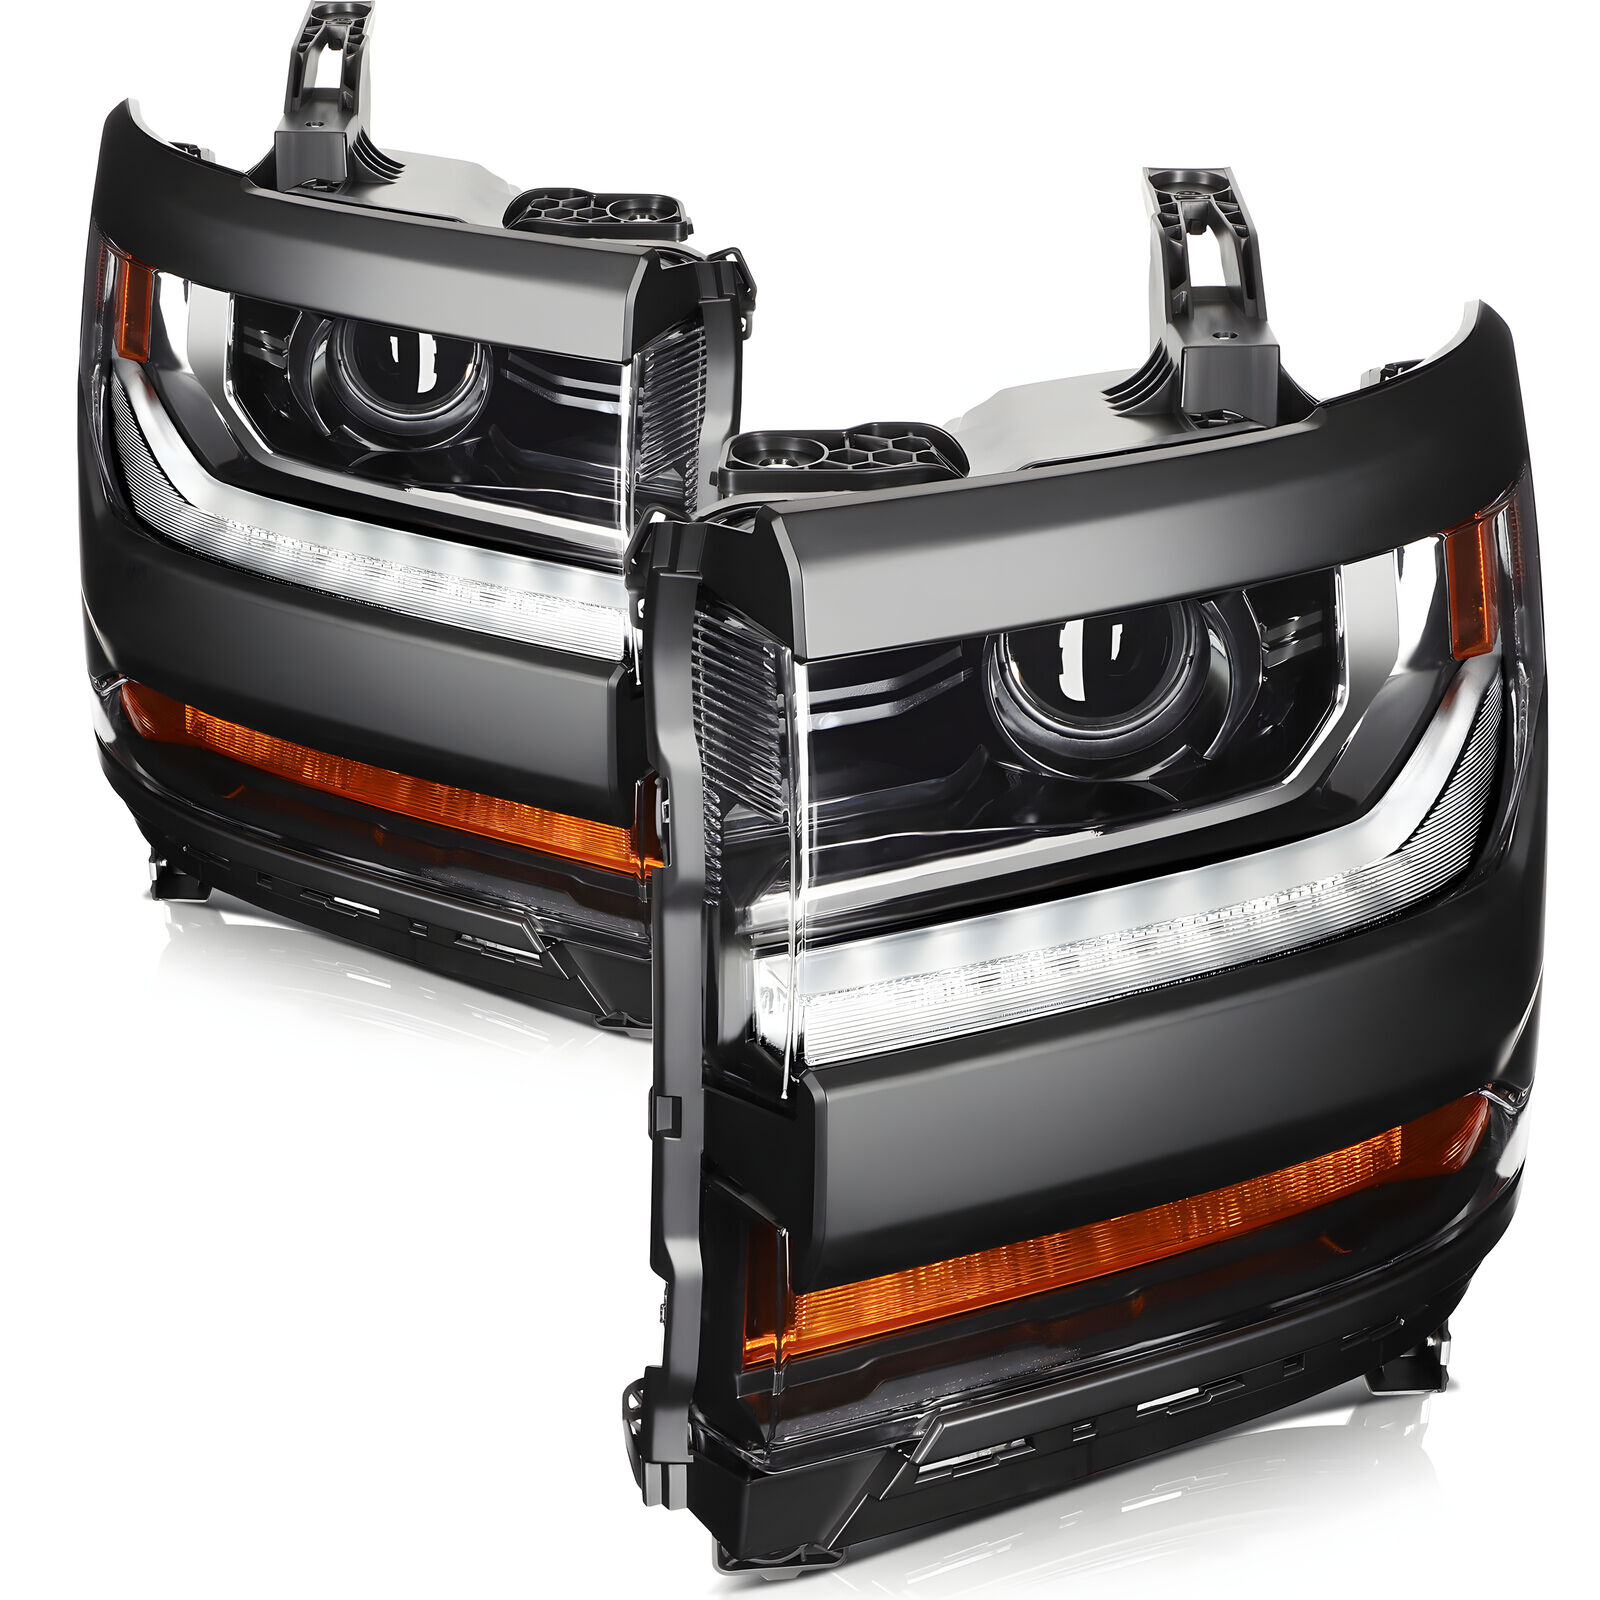 HID/Xenon Projector Headlight Pair W/ LED DRL For 2016-2019 Chevy Silverado 1500